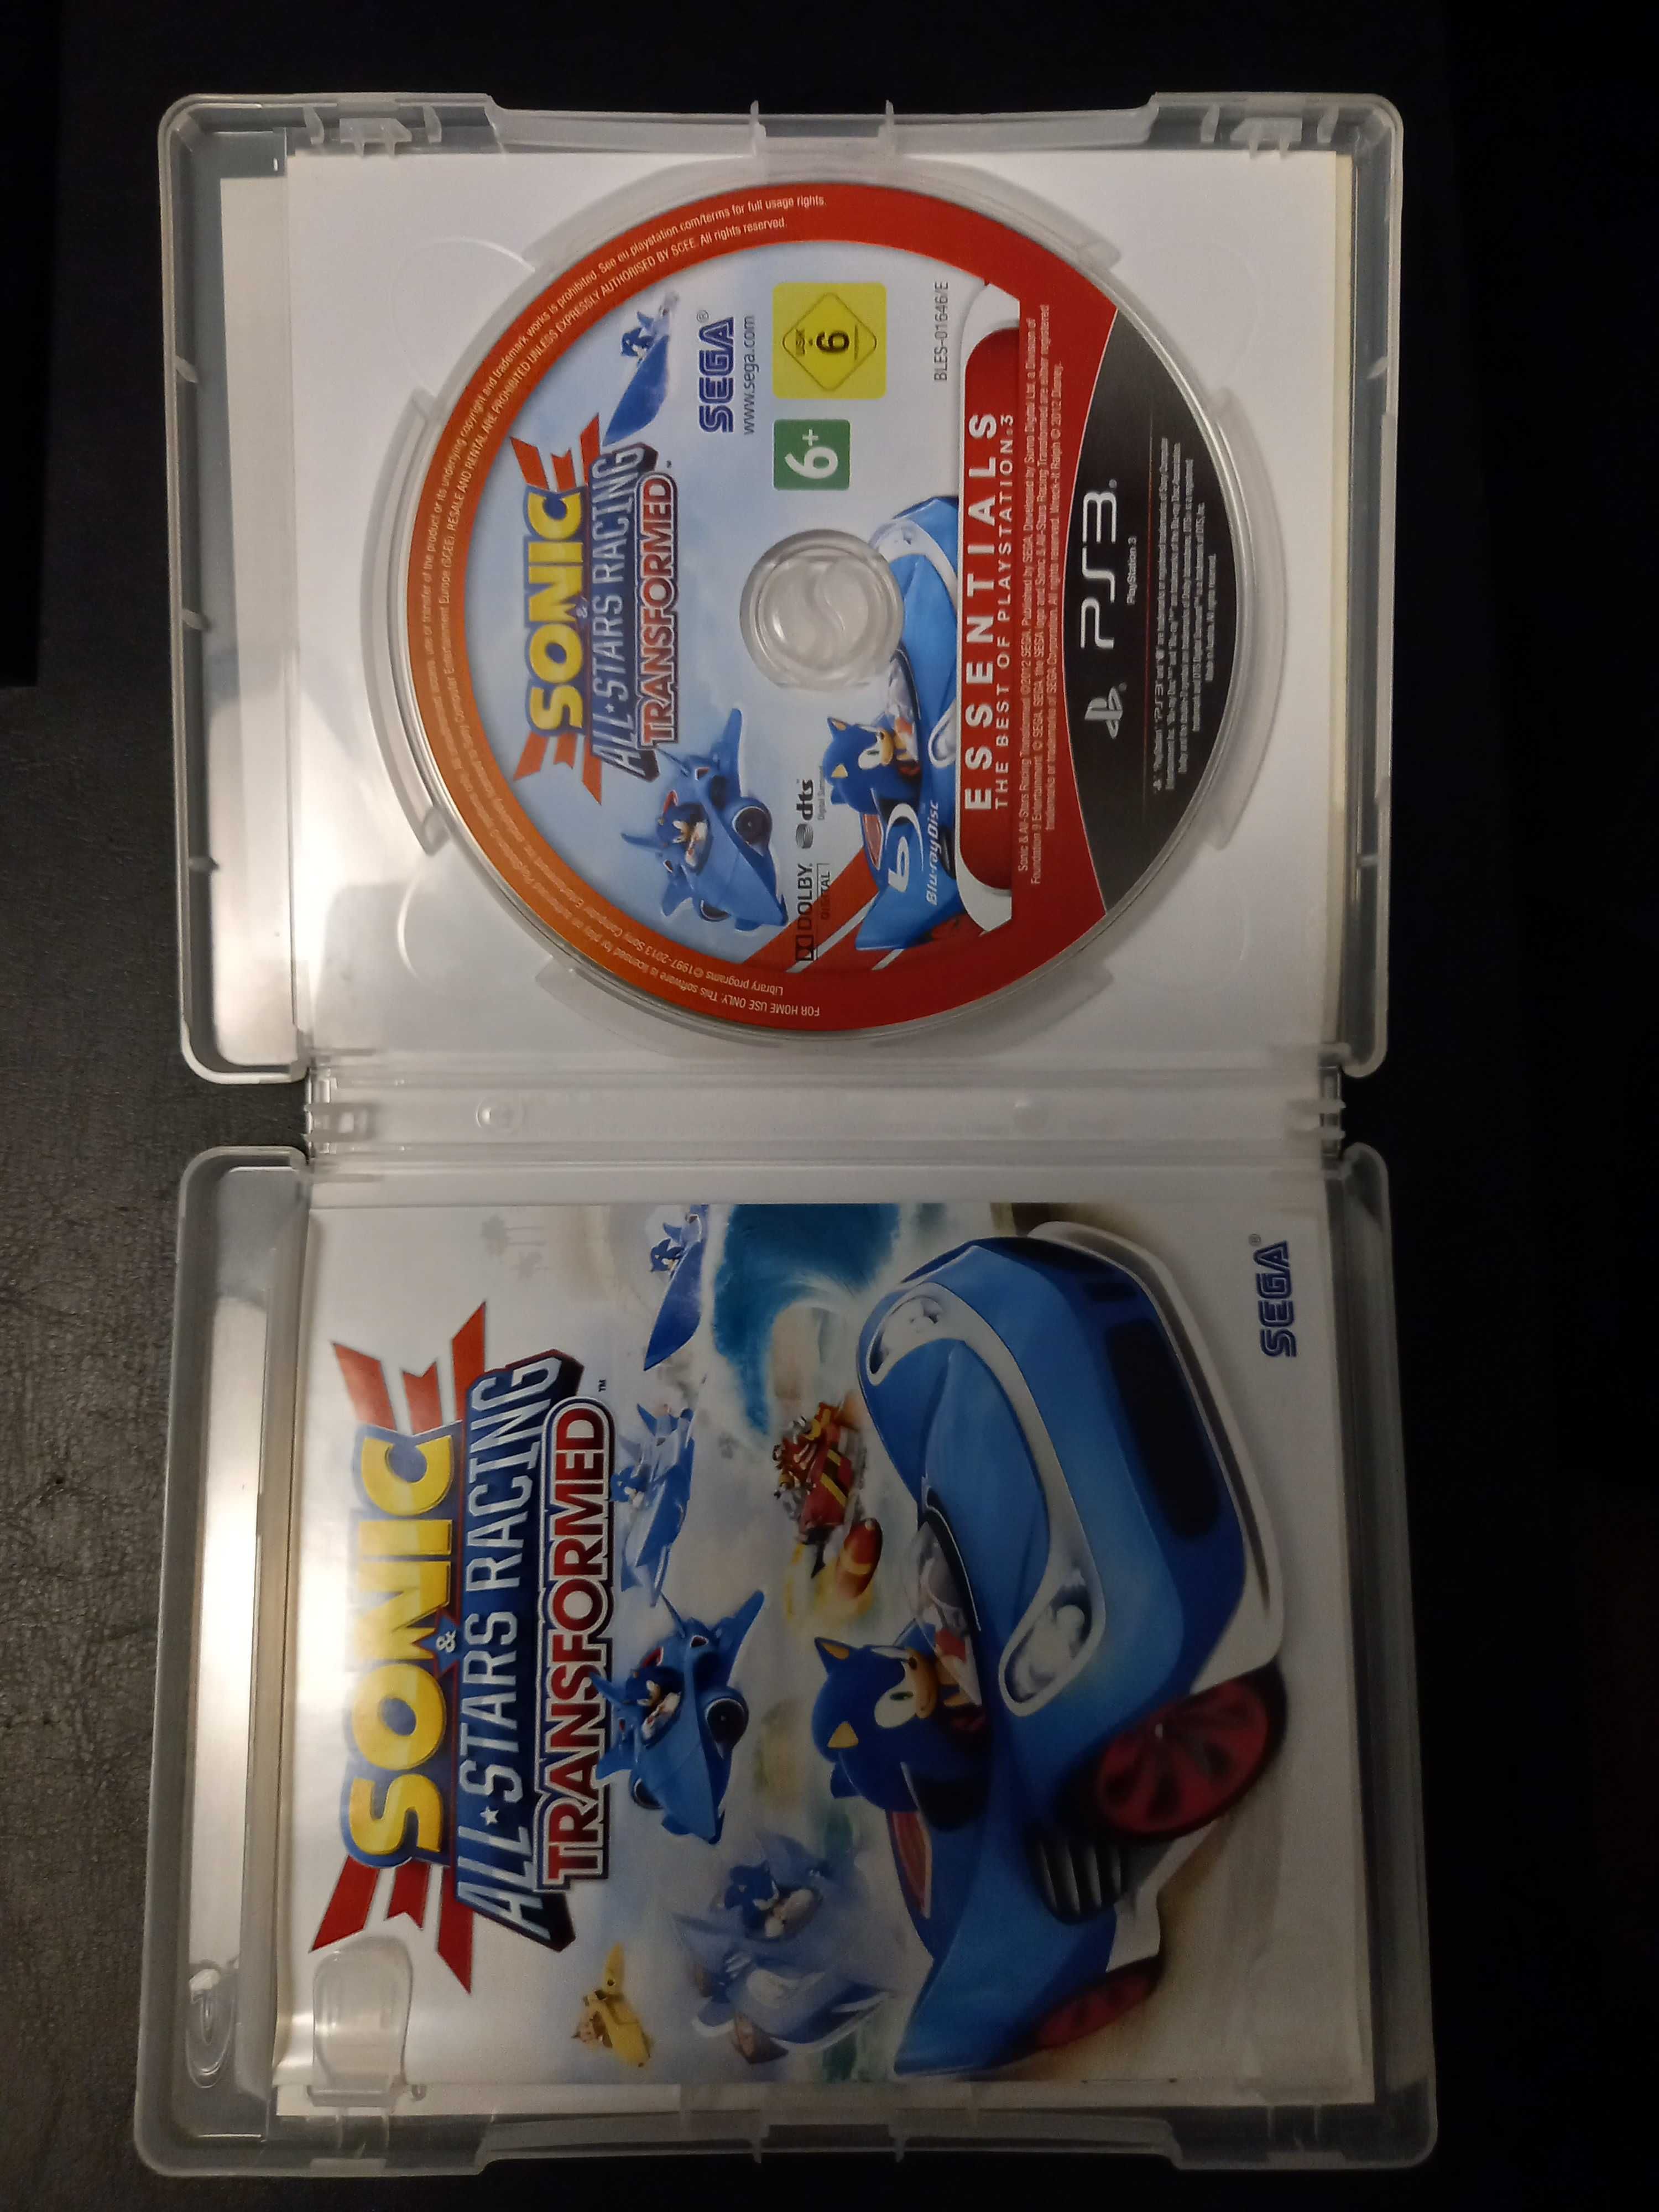 Sonic All Stars Racing Transformed Playstation3 PS3